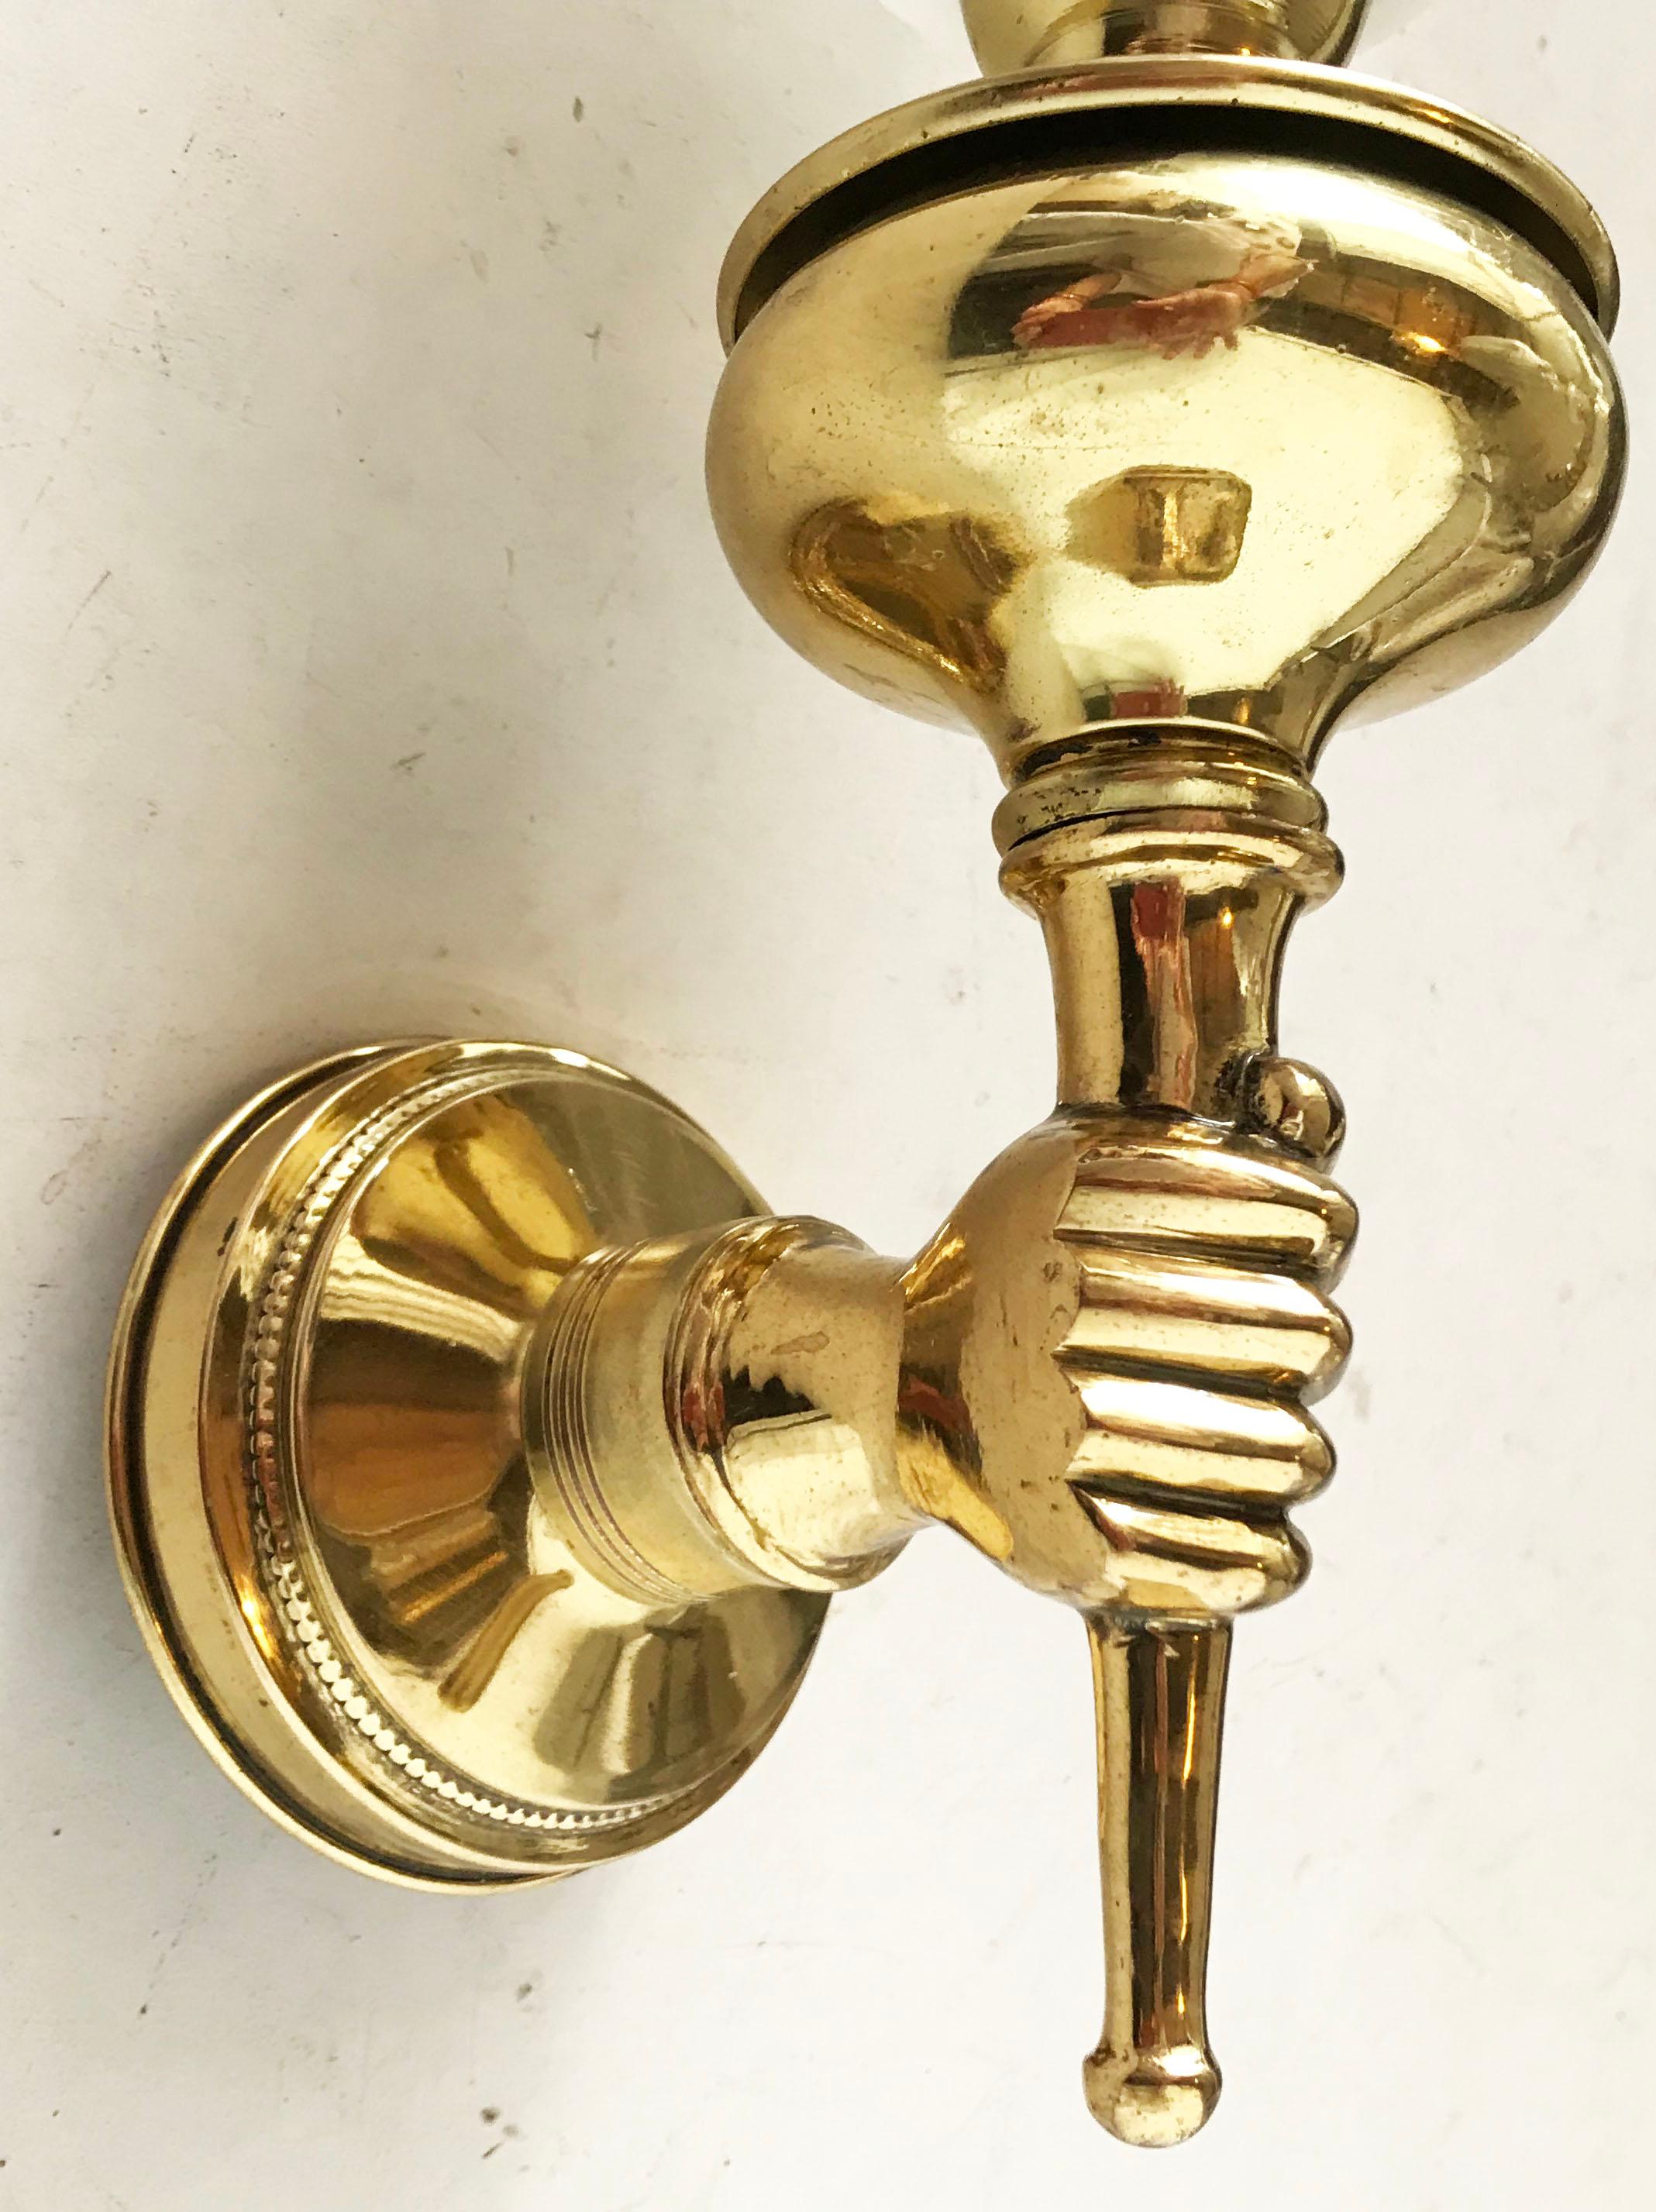 Pair of very elegant hand holding torchiere Arbus sconces.
Brass and white opaline shades
2 Pairs available, priced by pair 
Maximum wattage: 60w/ each bulb
US wired and in working condition.